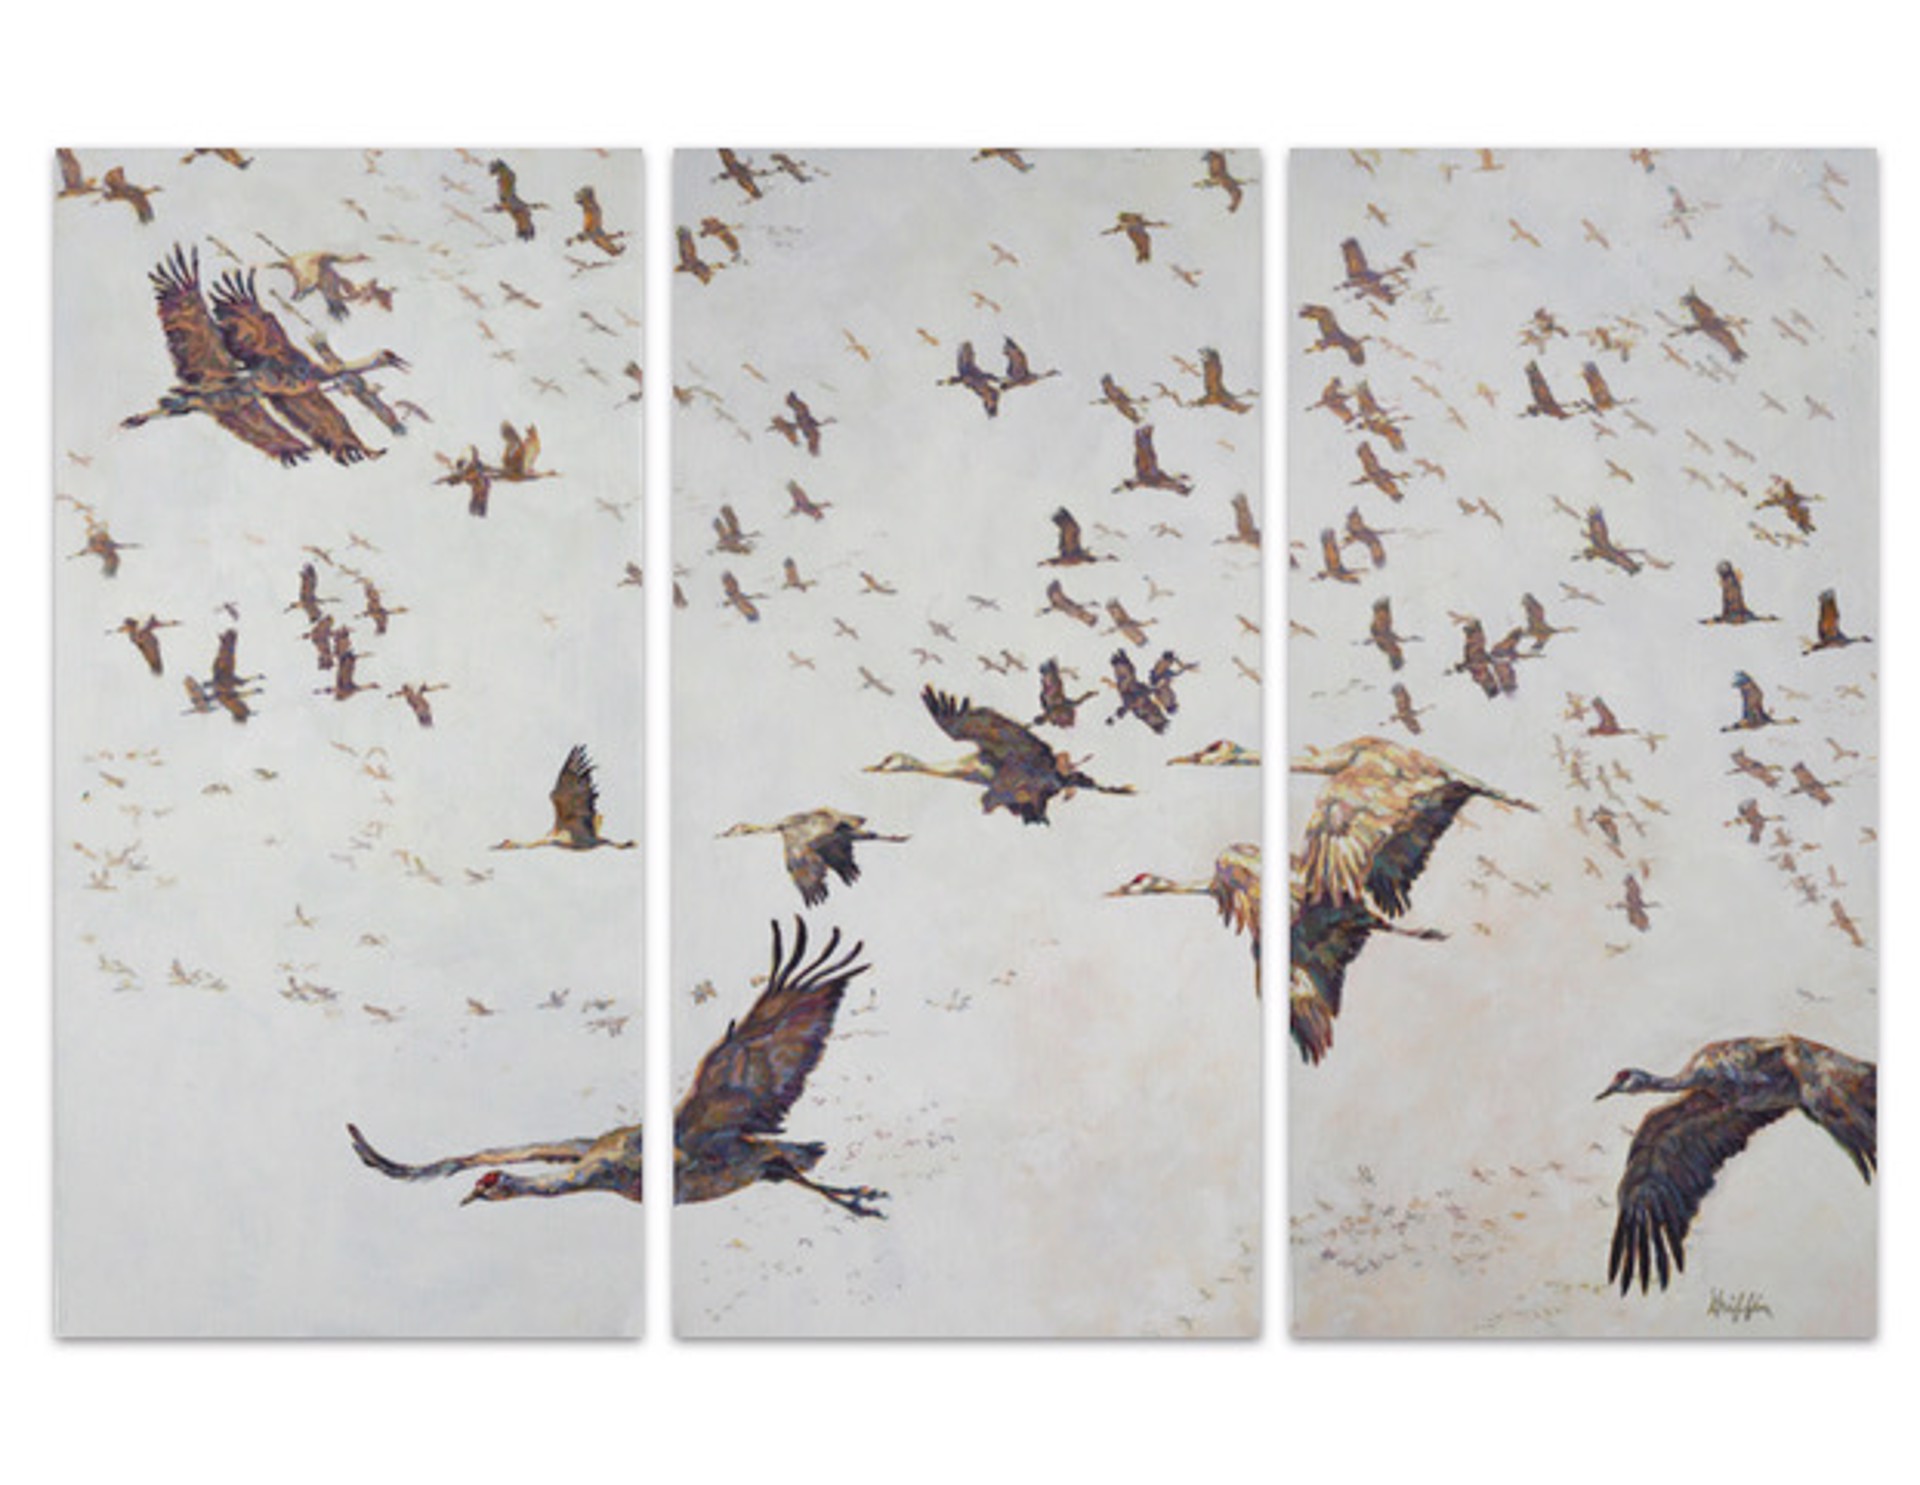 A Contemporary Triptych Oil Painting Of A Flock Of Sand Hill Cranes In Flight, By Patricia Griffin